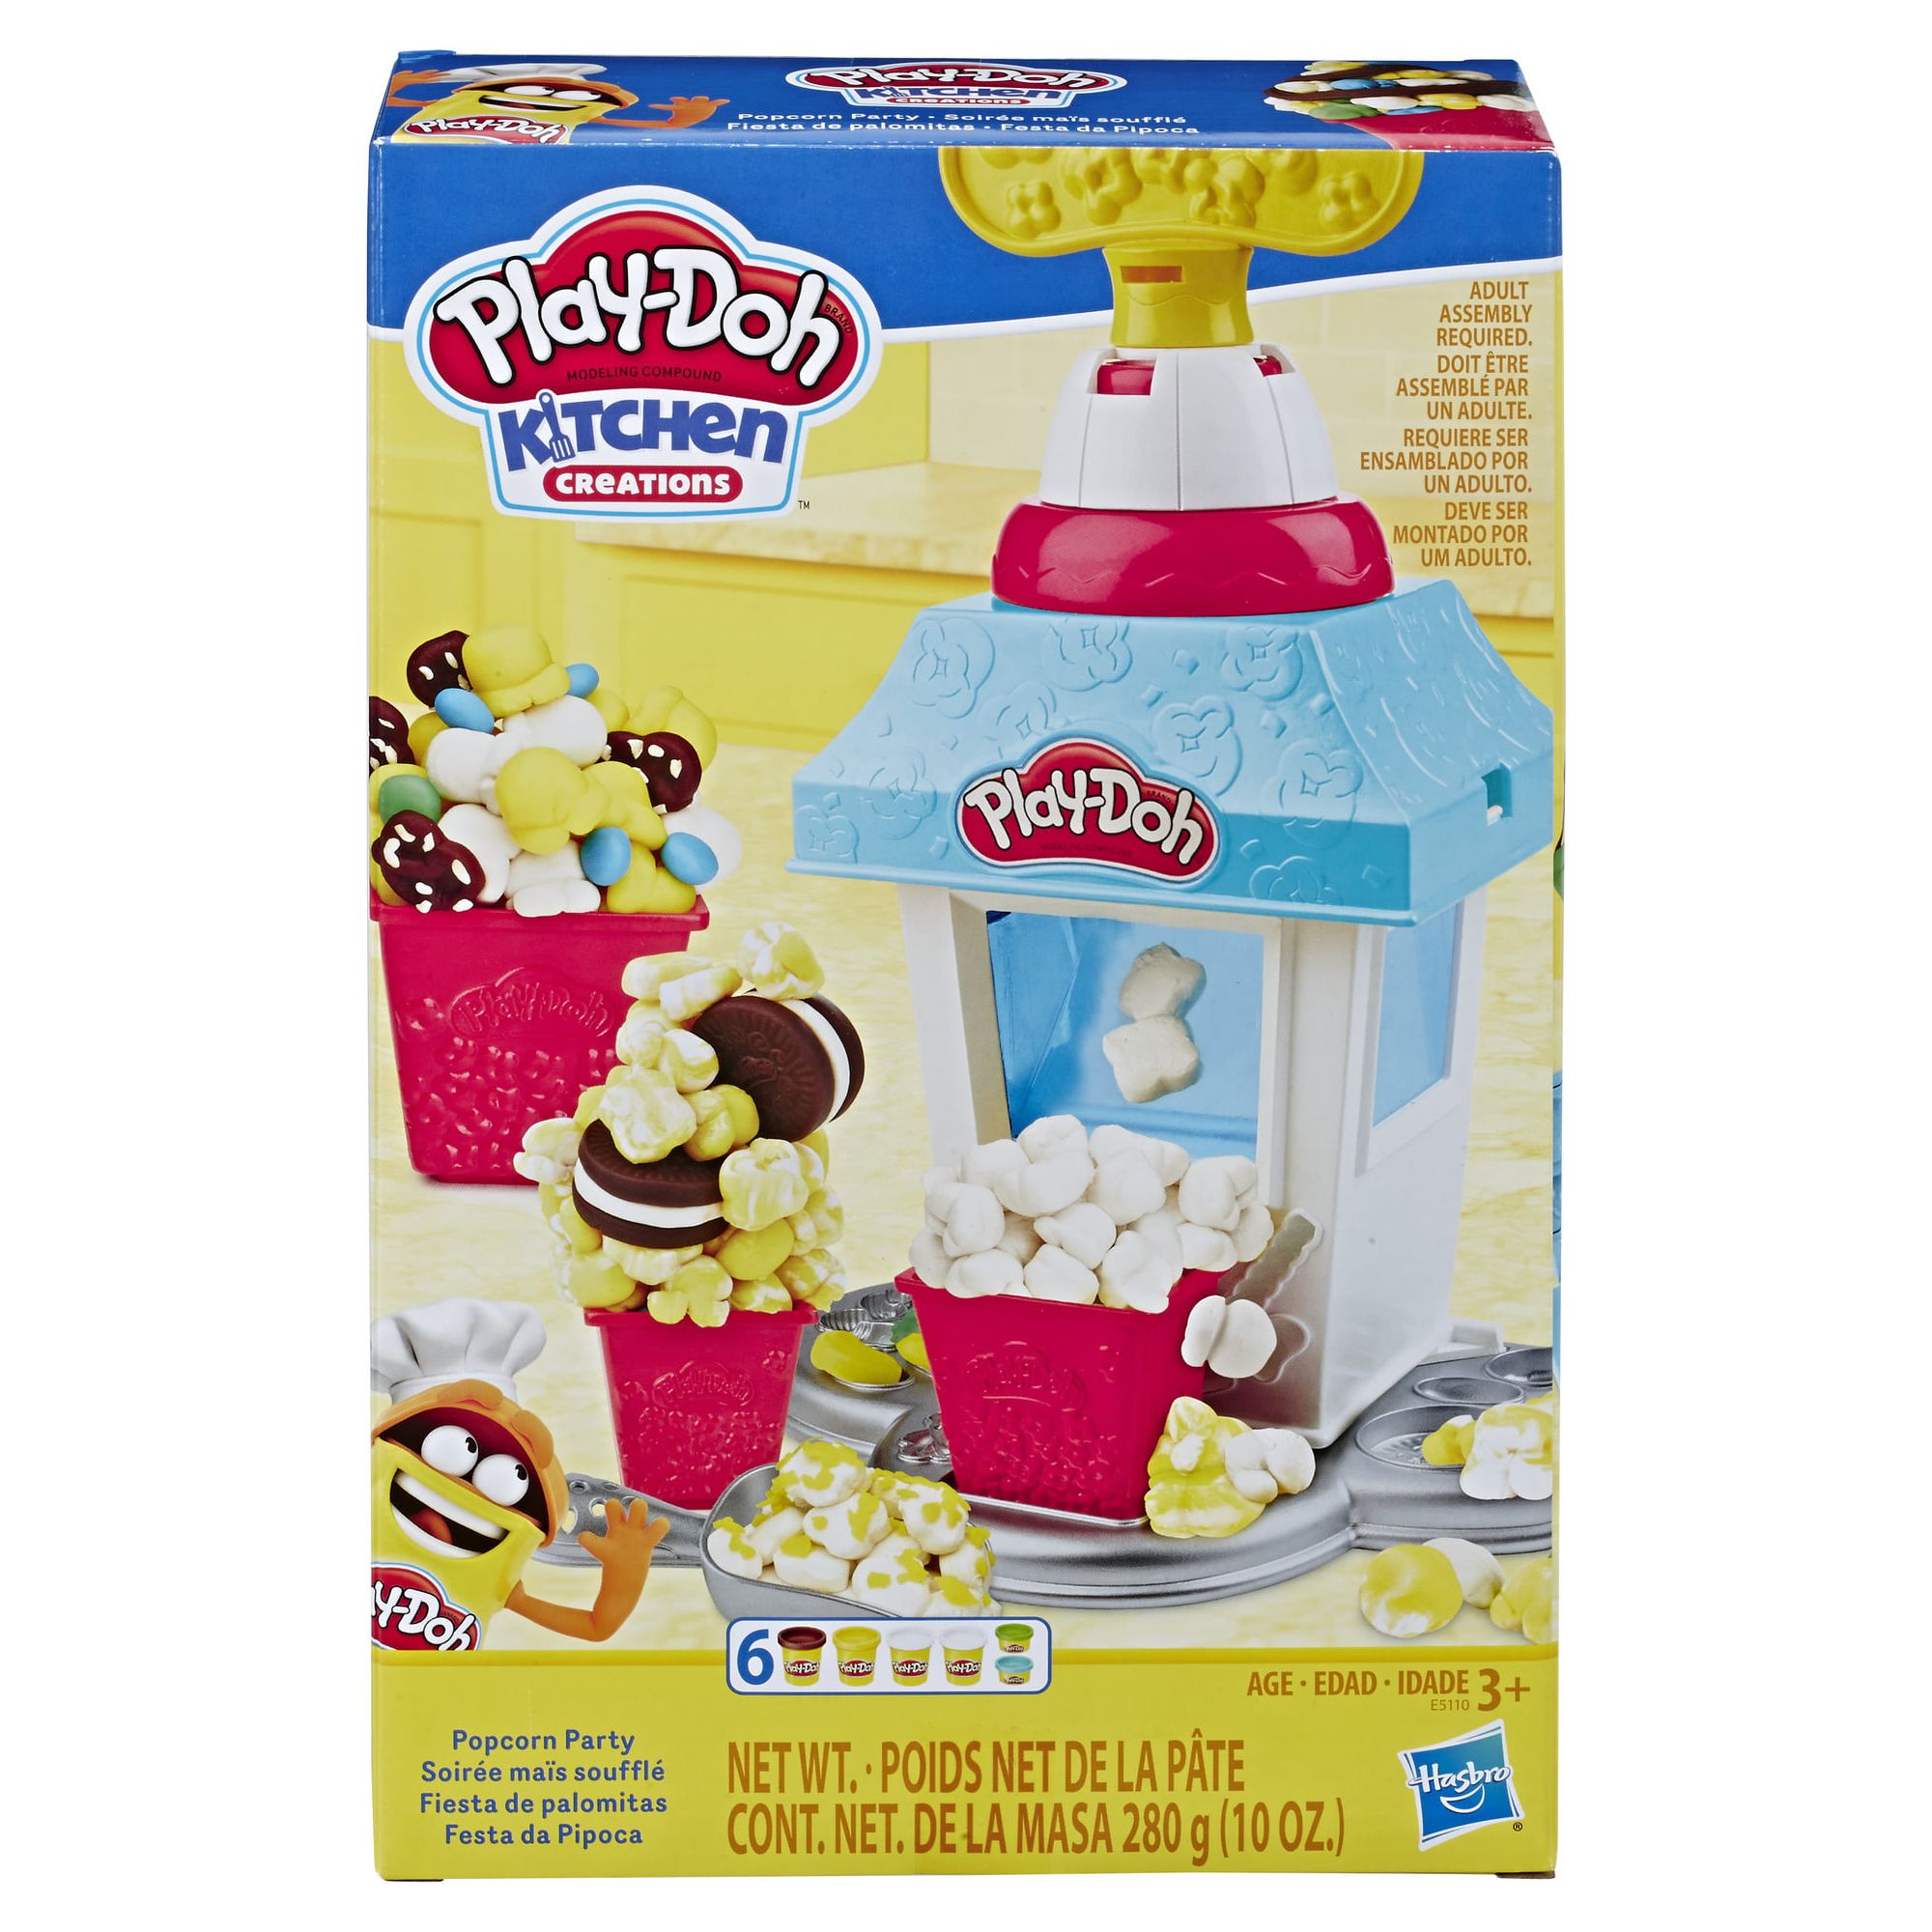 Play-Doh Kitchen Creations Popcorn Party Play Food Set, 6 Cans (10 oz) - image 3 of 15